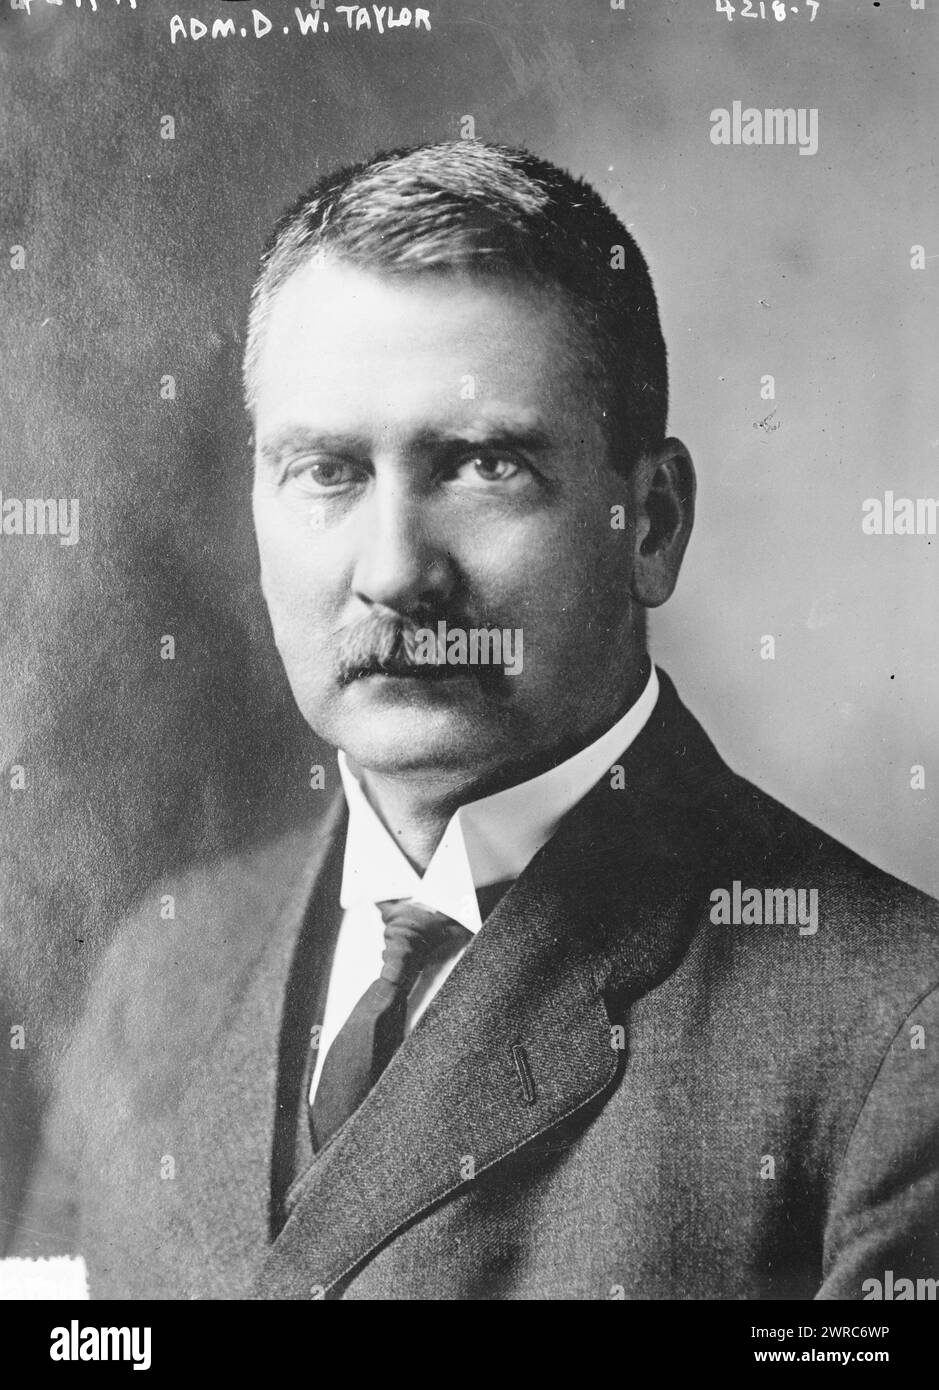 Adm. D.W. Taylor, Photograph shows Rear Admiral David Watson Taylor, USN (1864-1940), a naval architect and engineer., 1917 March 4, Glass negatives, 1 negative: glass Stock Photo